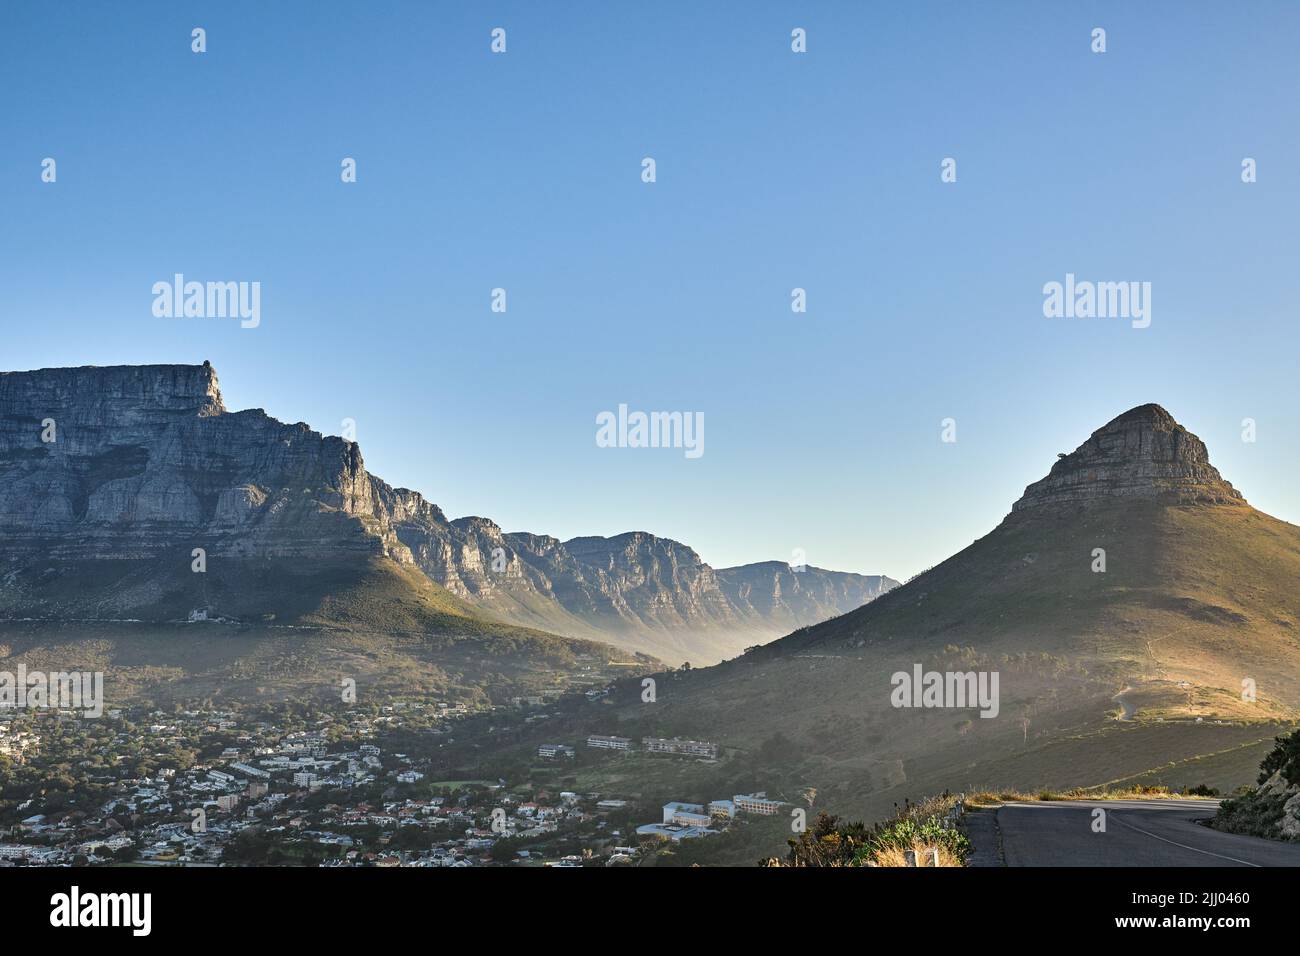 Mountain background, landscape of Table mountain and suburb with private houses against a blue sky background with copyspace. Beautiful view of Stock Photo